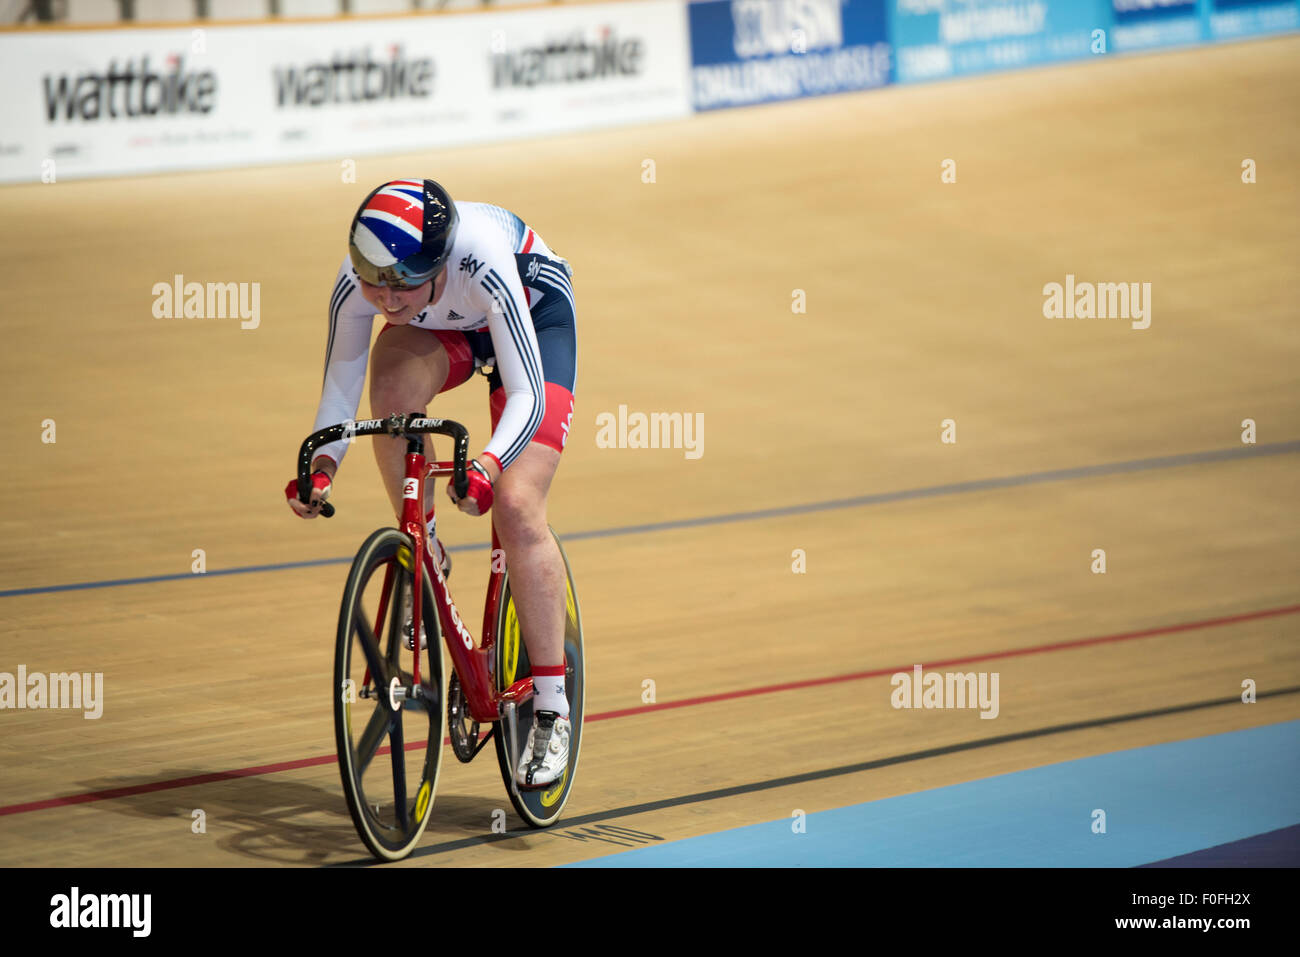 Katie Archibald competes in the scratch race at the Revolution Series at Derby Arena, Derby, United Kingdom on 14 August 2015. The Revolution Series is a professional track racing series featuring many of the world's best track cyclists. This event, taking place over 3 days from 14-16 August 2015, is an important preparation event for the Rio 2016 Olympic Games, allowing British riders to score qualifying points for the Games. Stock Photo